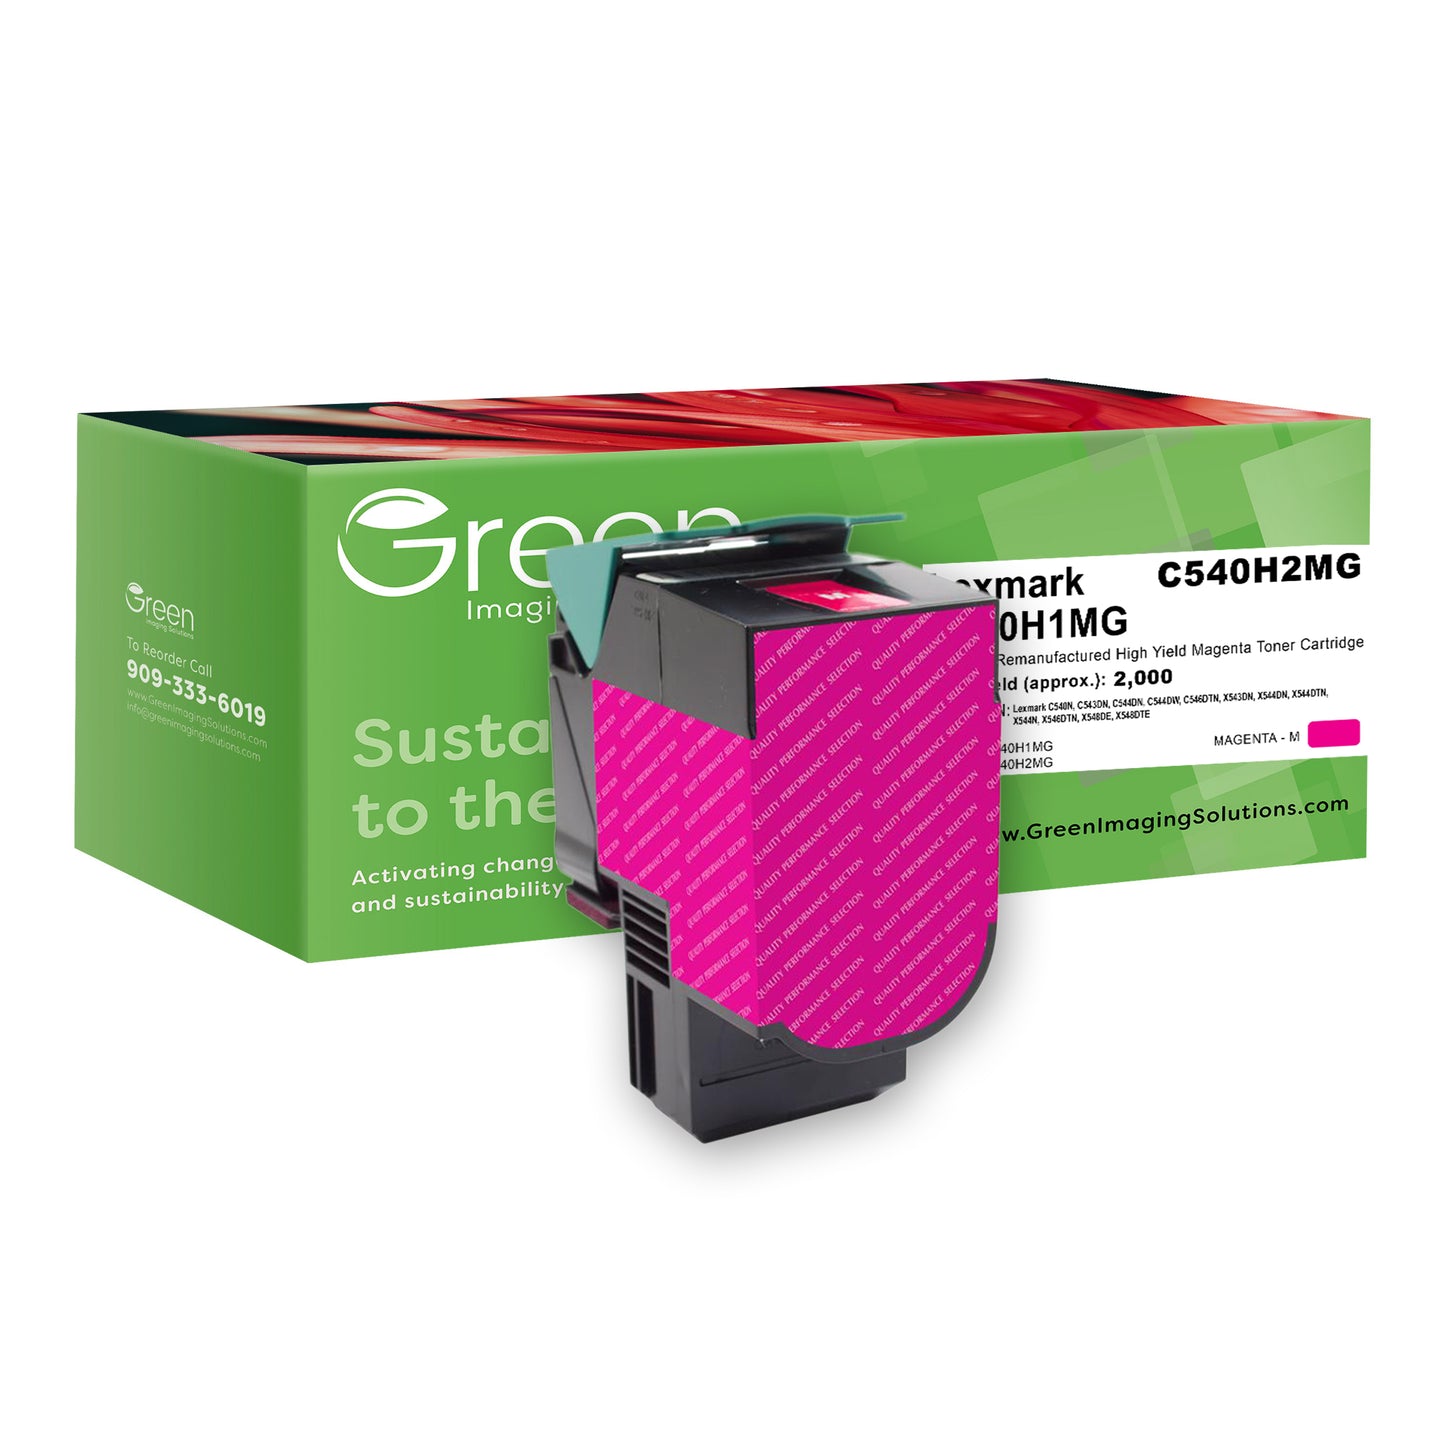 Green Imaging Solutions USA Remanufactured High Yield Magenta Toner Cartridge for Lexmark C540/C544/X543/X544